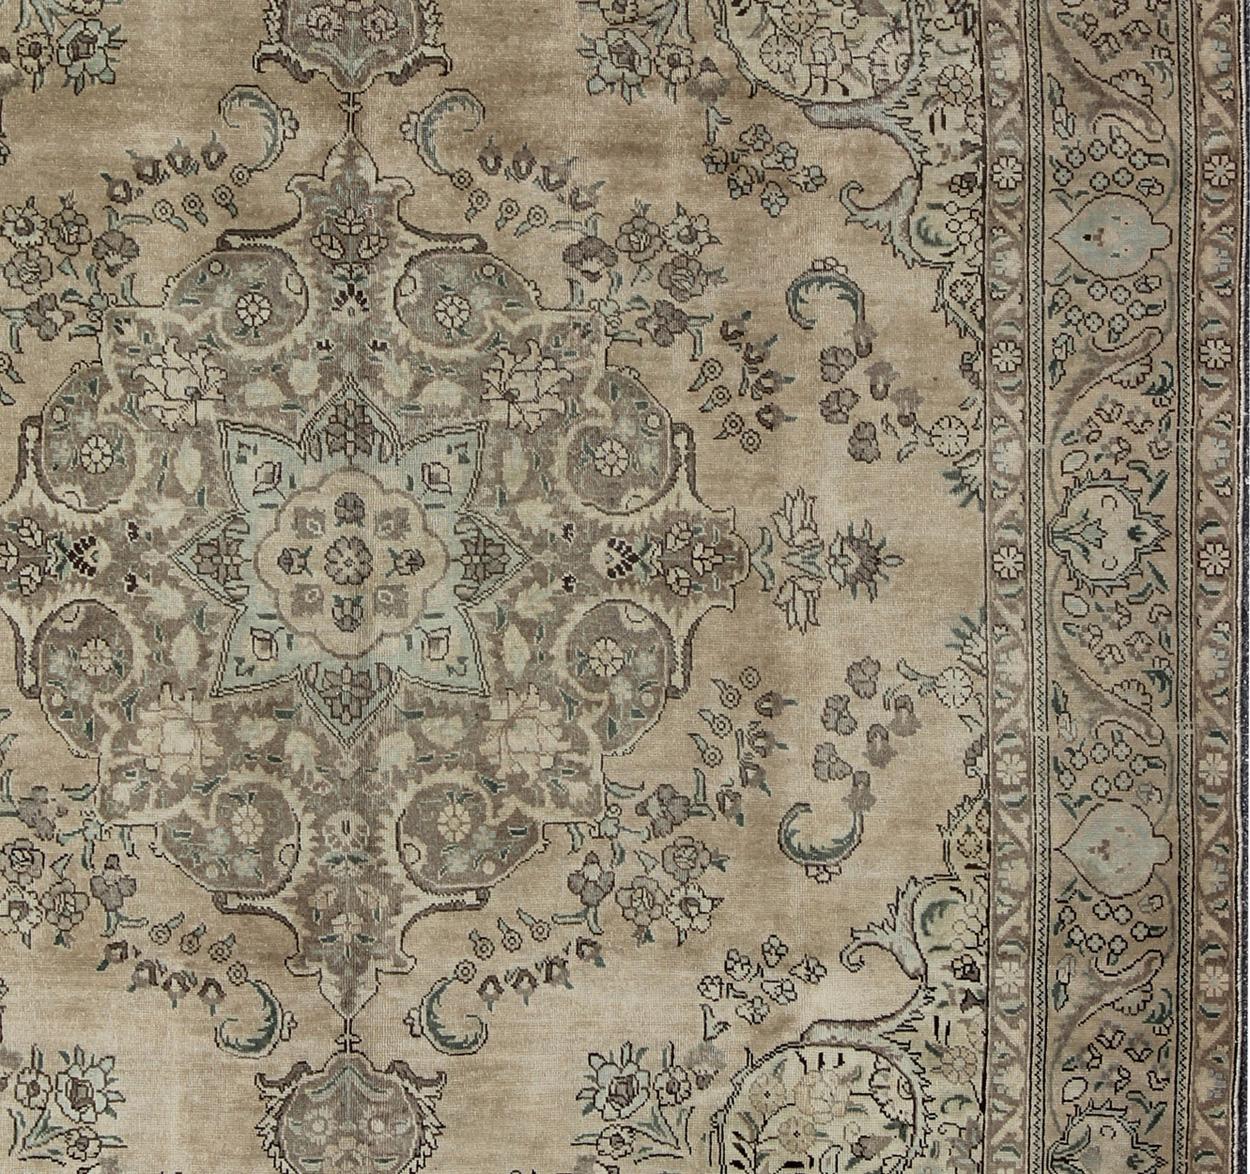 Medallion style Tabriz Persian vintage rug with swirling floral pattern, Keivan Woven Arts / rug H-702-11, country of origin / type: Iran / Tabriz, circa 1950

This mid-20th century, handwoven vintage Persian Tabriz rug features an expansive